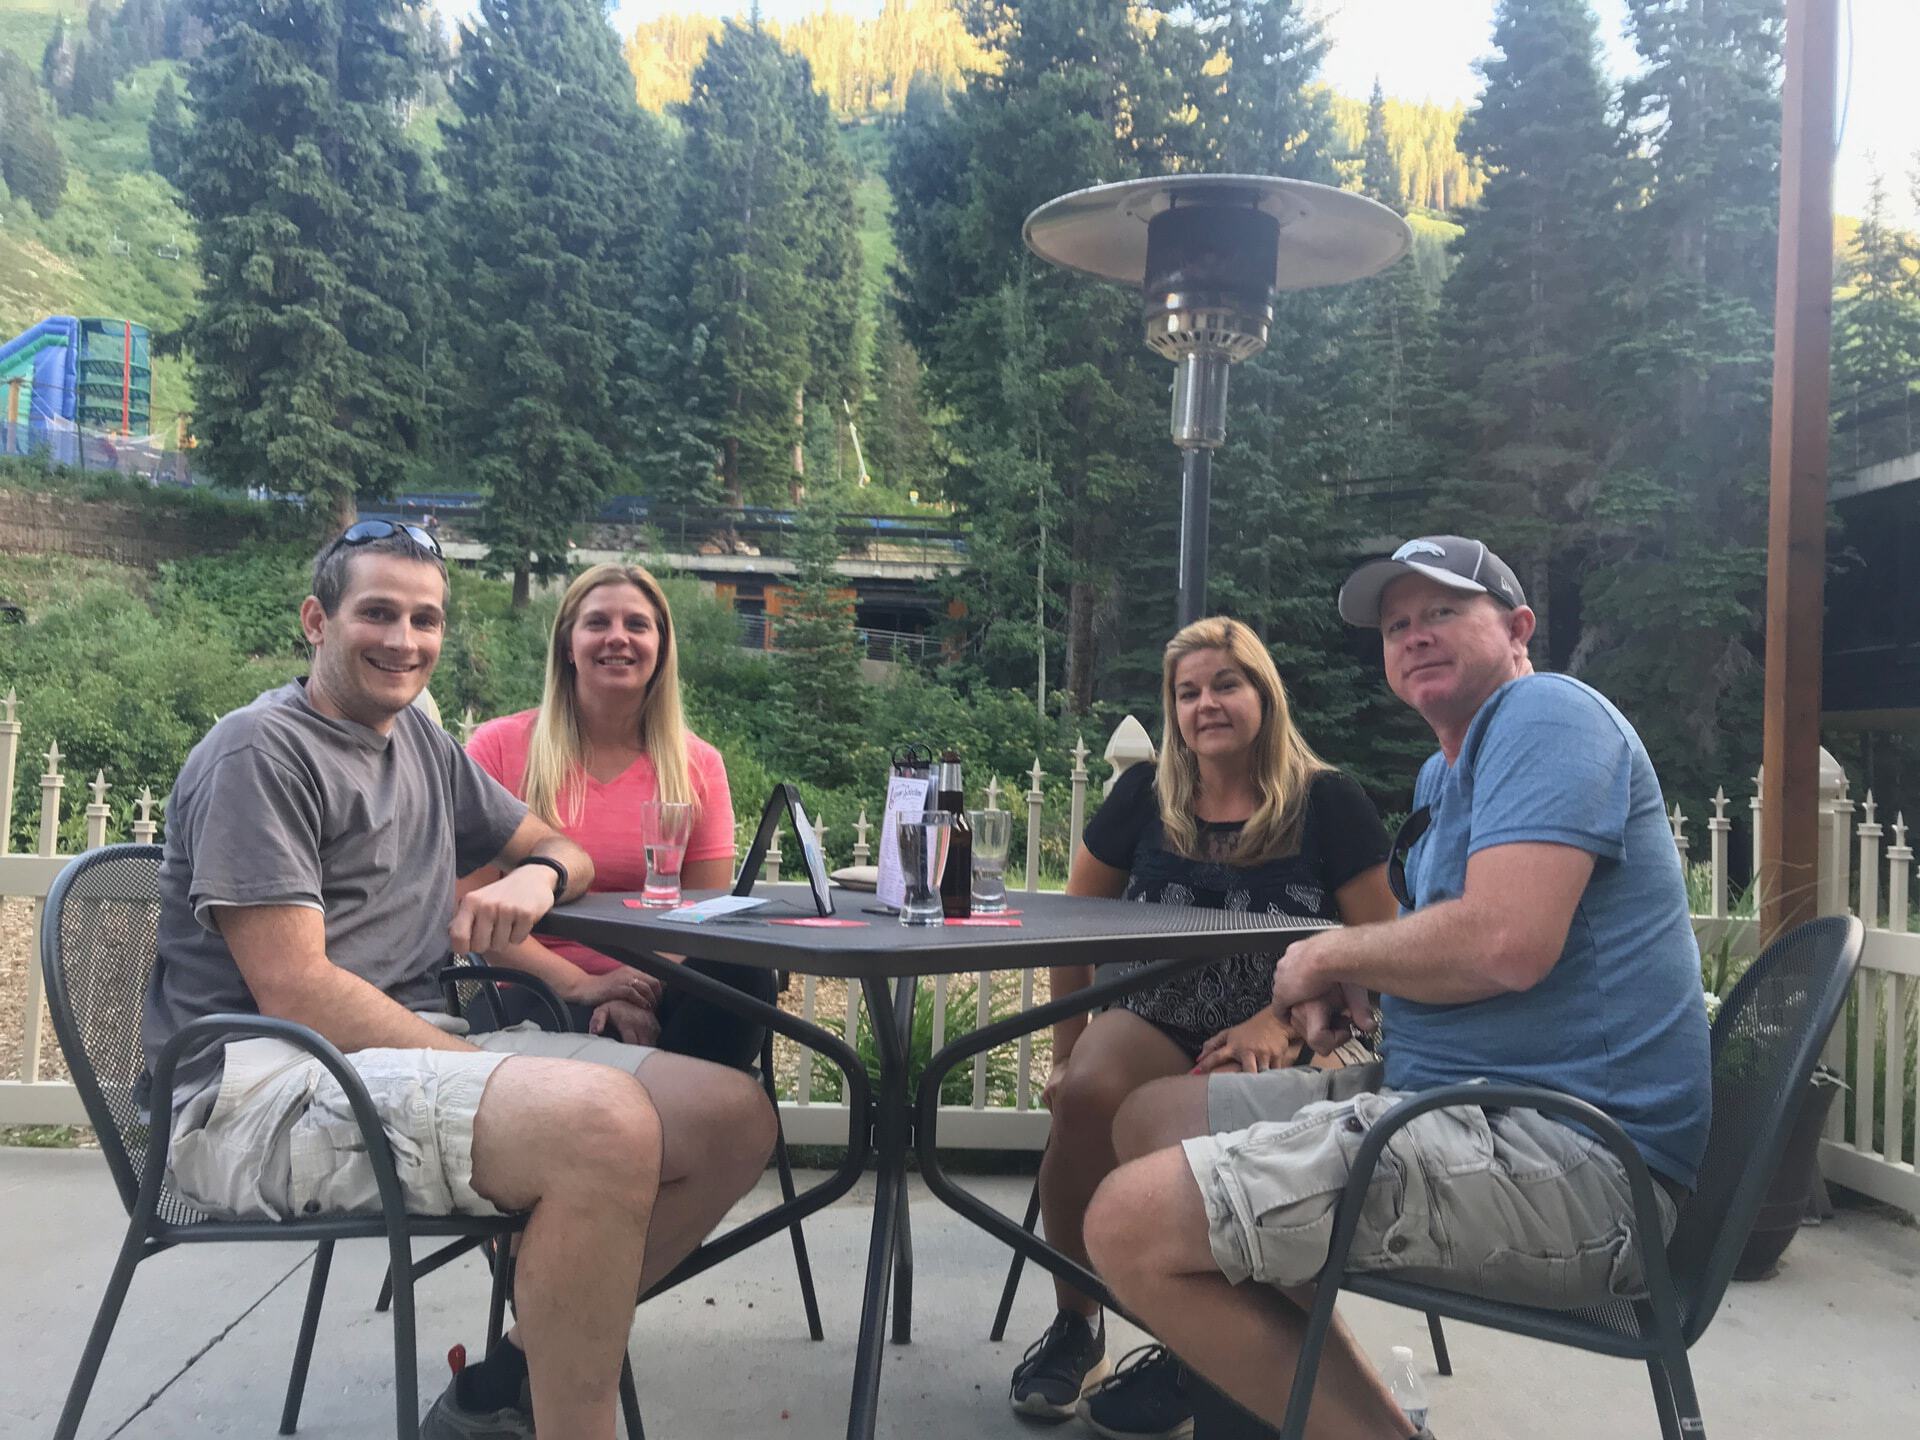 All of us relaxing on the Tram Club patio at Snowbird Ski Resort